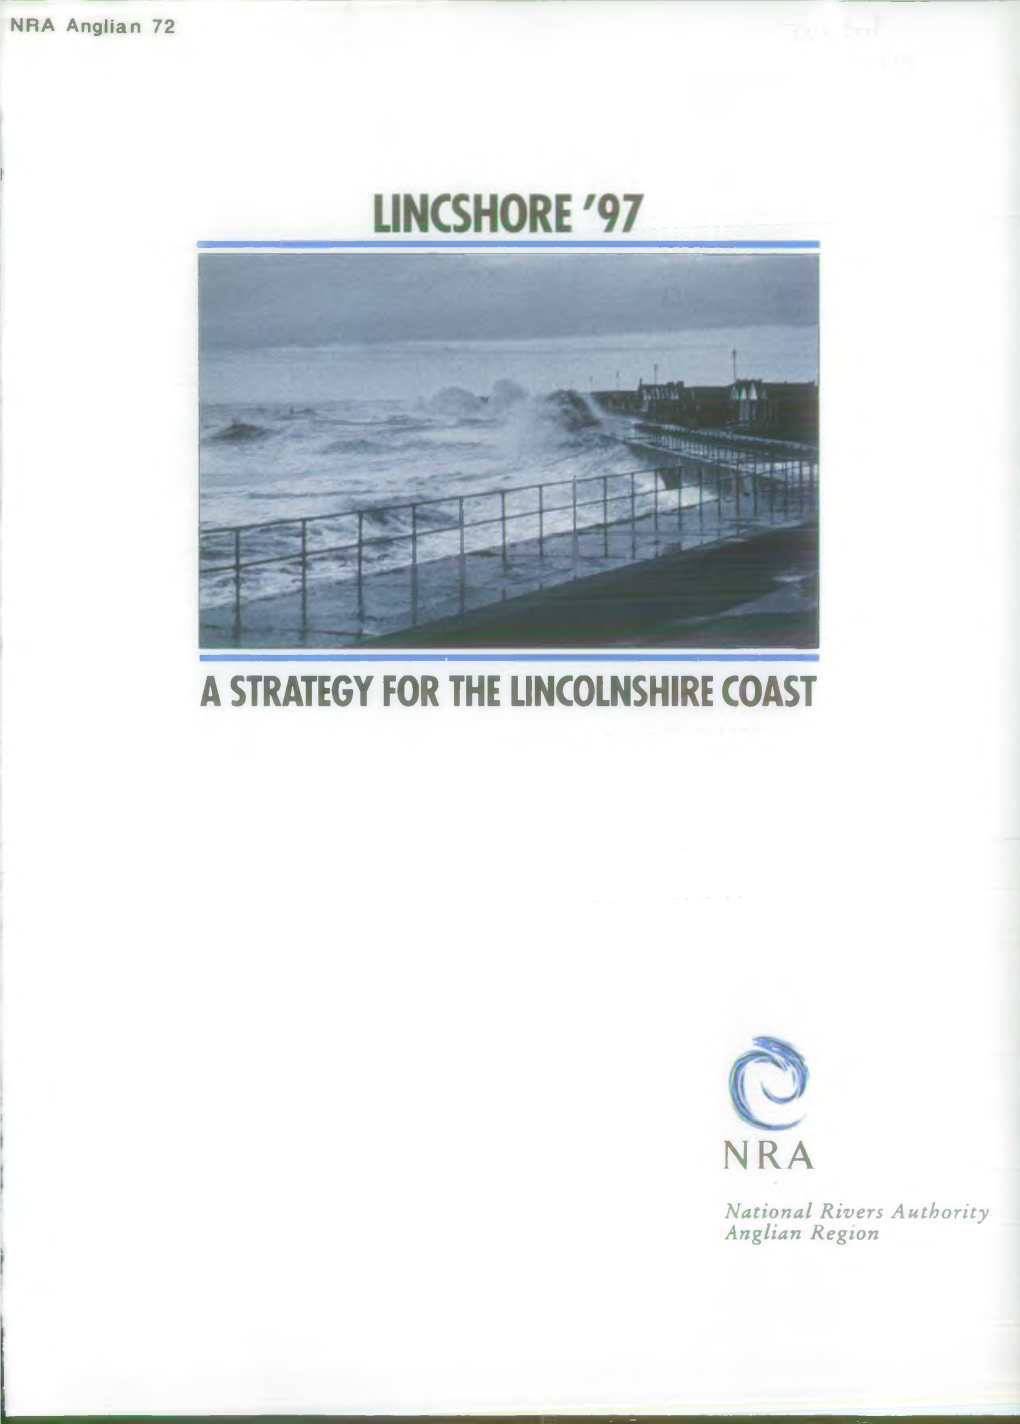 A Strategy for the Lincolnshire Coast